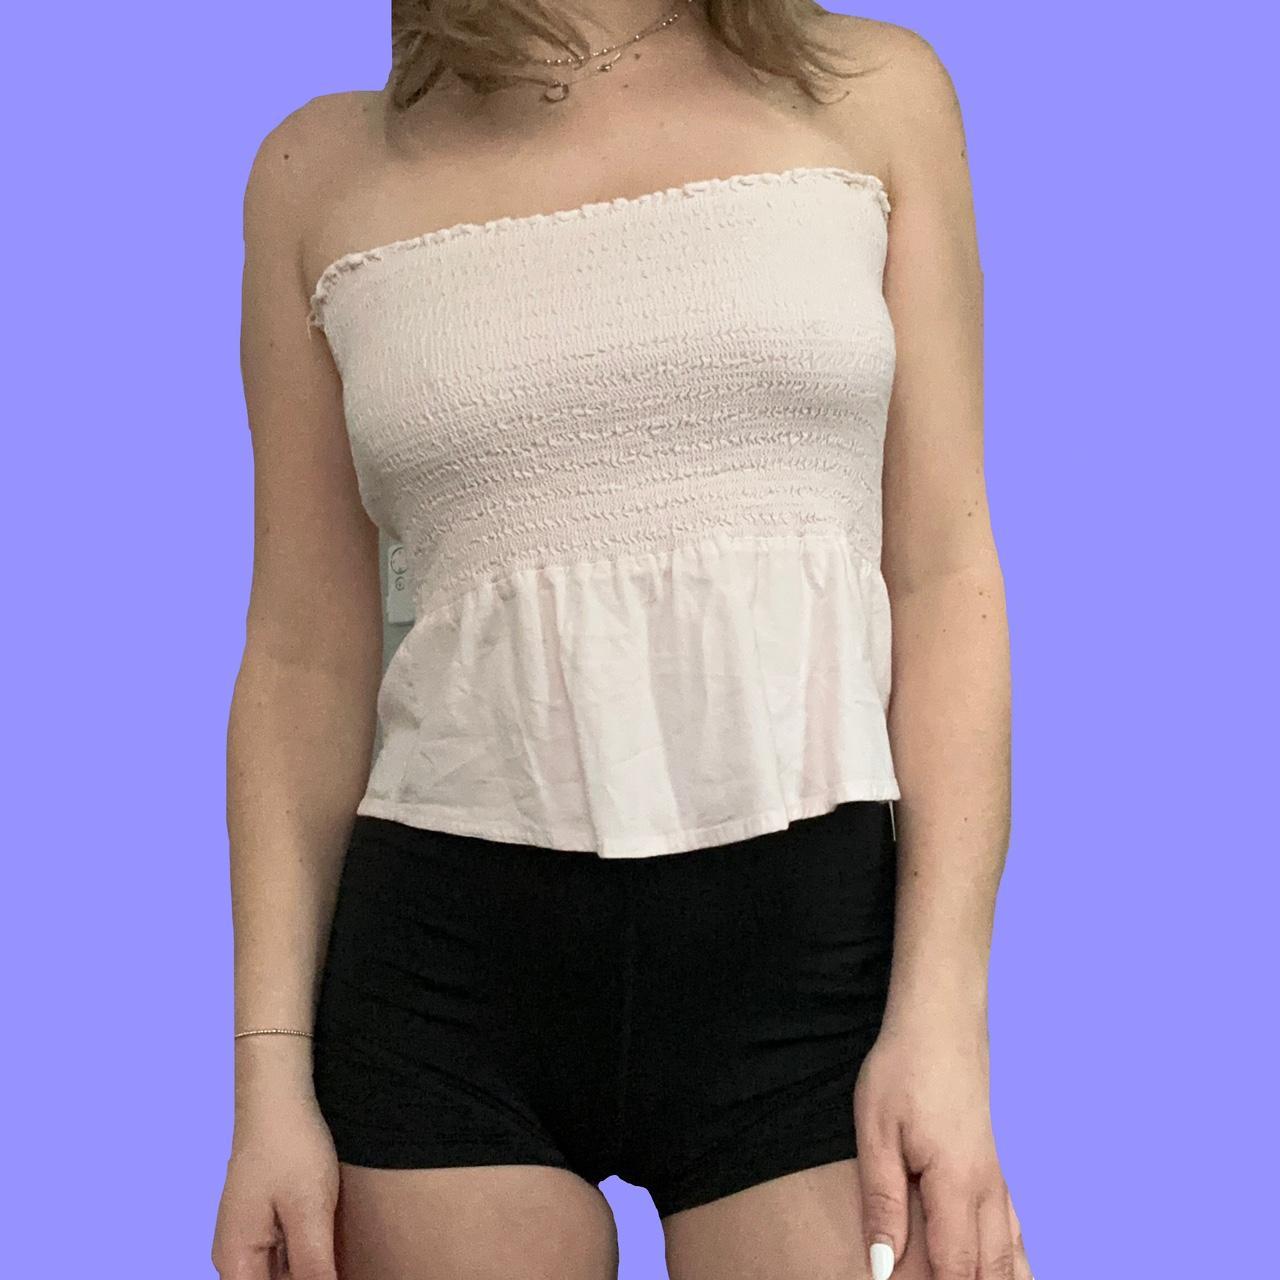 LIGHT PINK BRANDY MELVILLE TUBE TOP💕, -perfect for